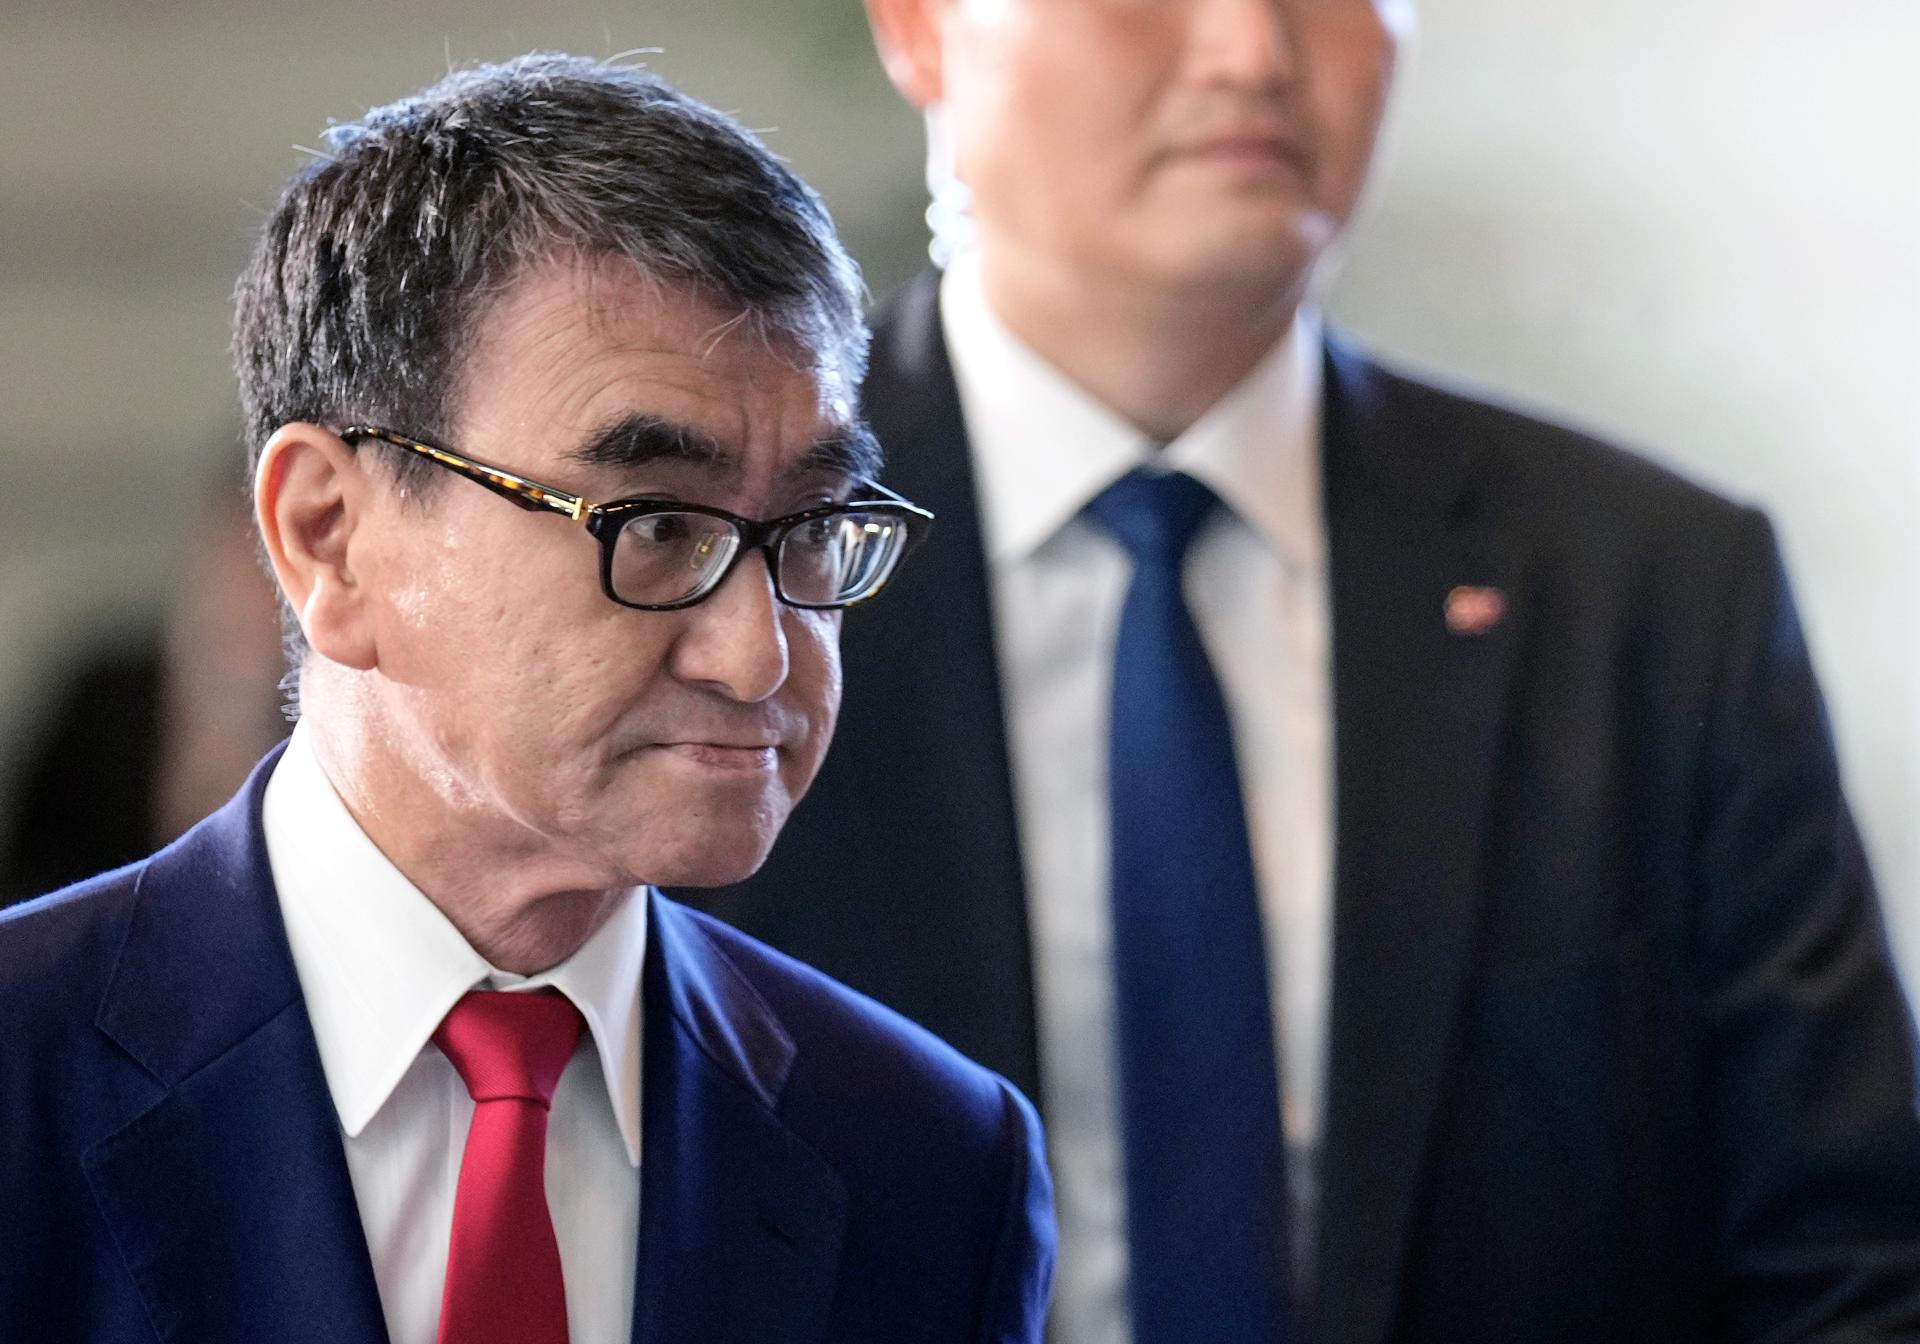 Re-appointed Digital Affairs Minister Taro Kono arrives at the prime minister's official residence on the day of the Cabinet reshuffle, in Tokyo, Japan, 13 September 2023. EFE/EPA/FRANCK ROBICHON
